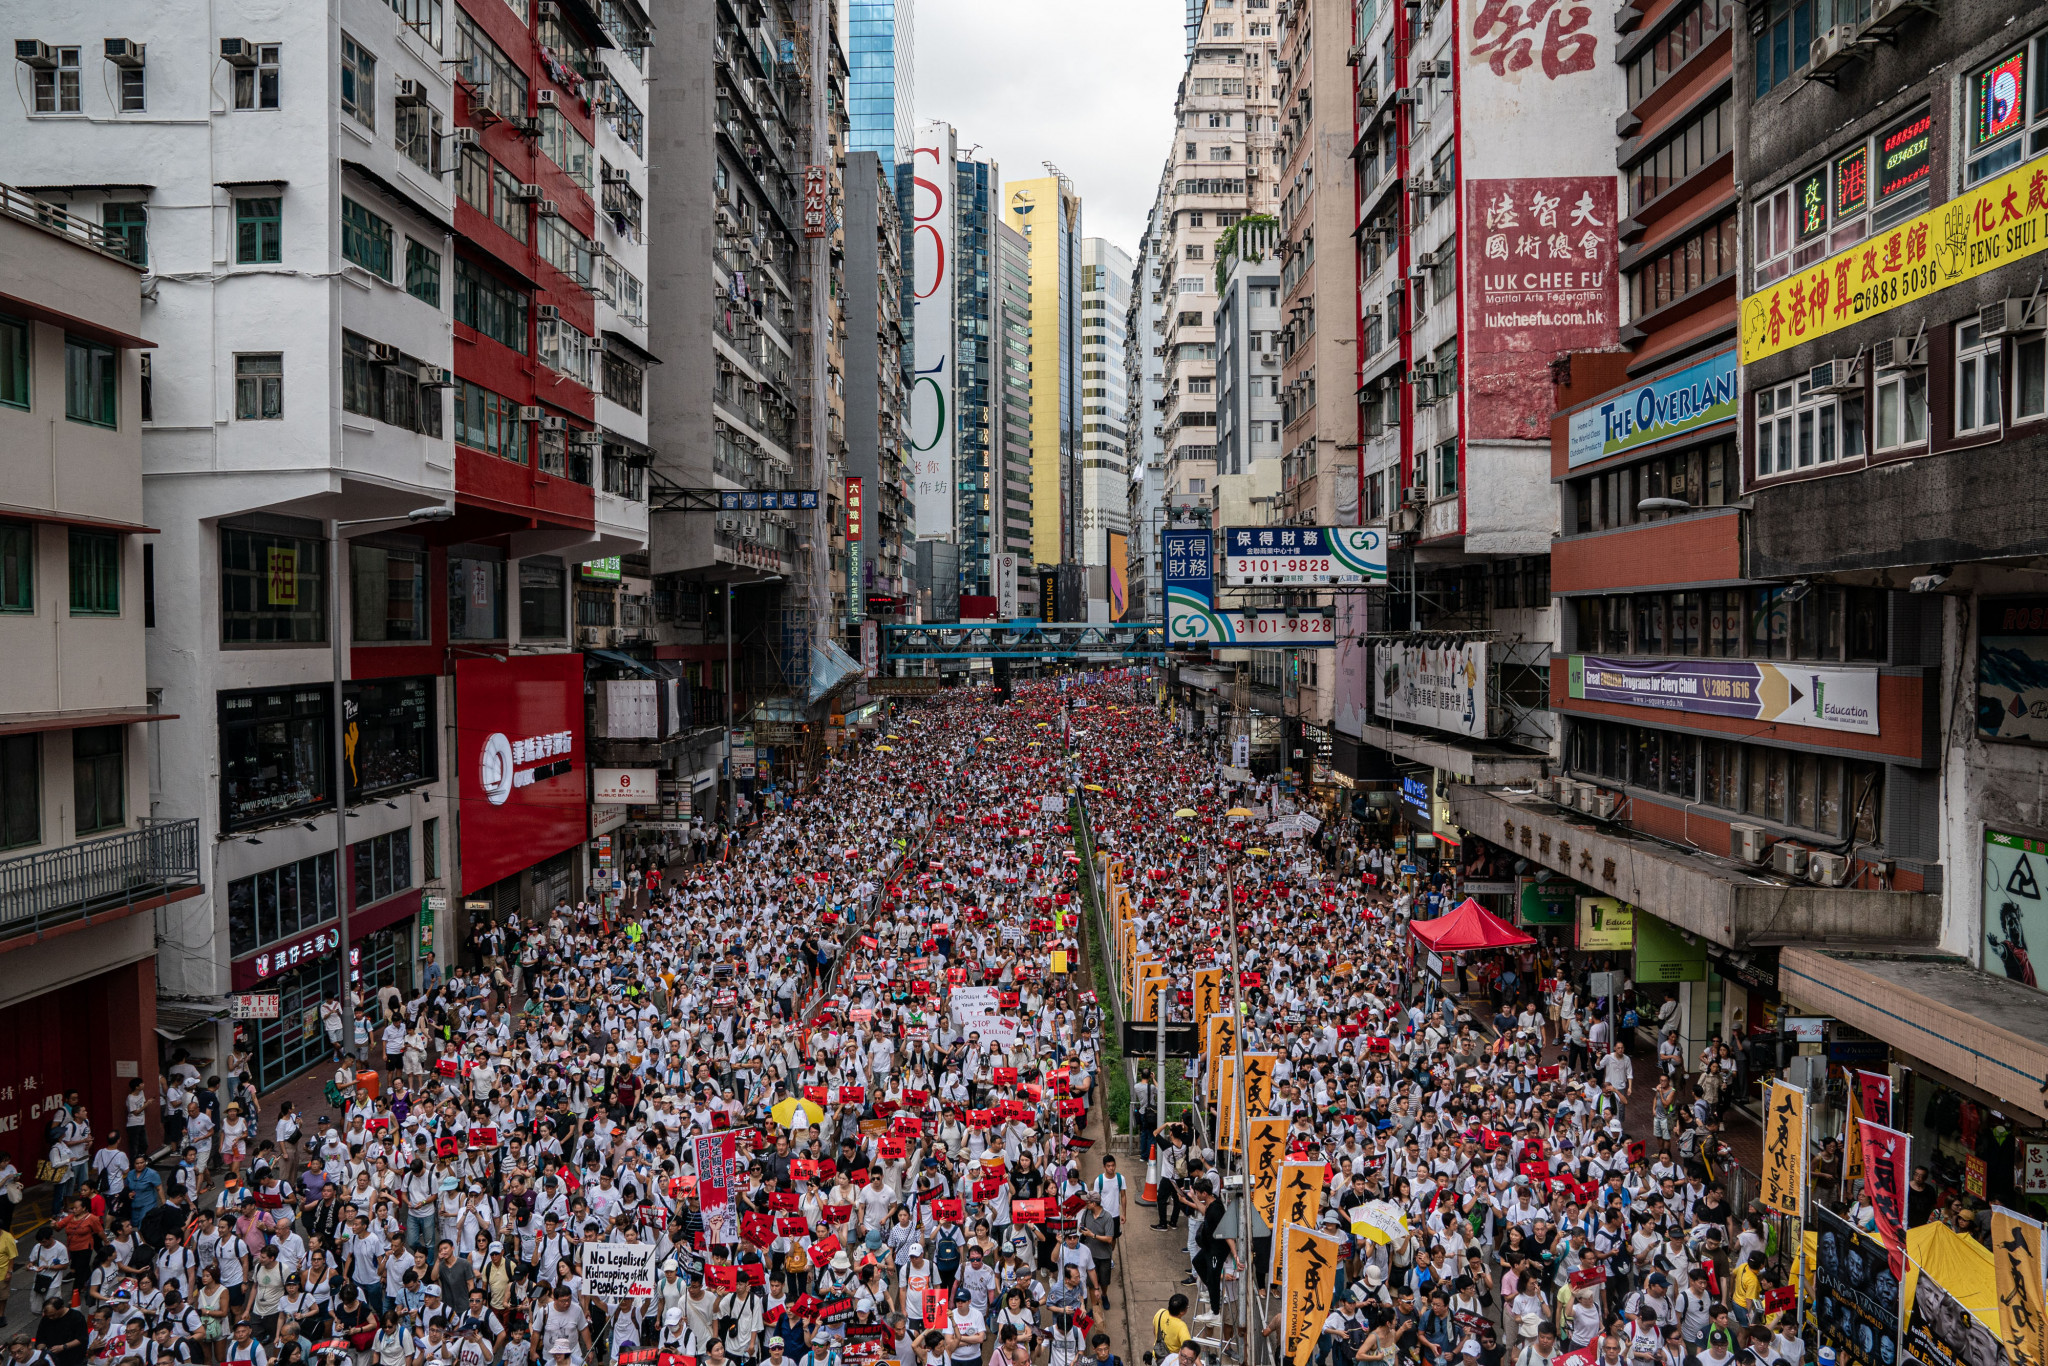 Glory to Hong Kong is associated with pro-democracy protests in the city in 2019 ©Getty Images